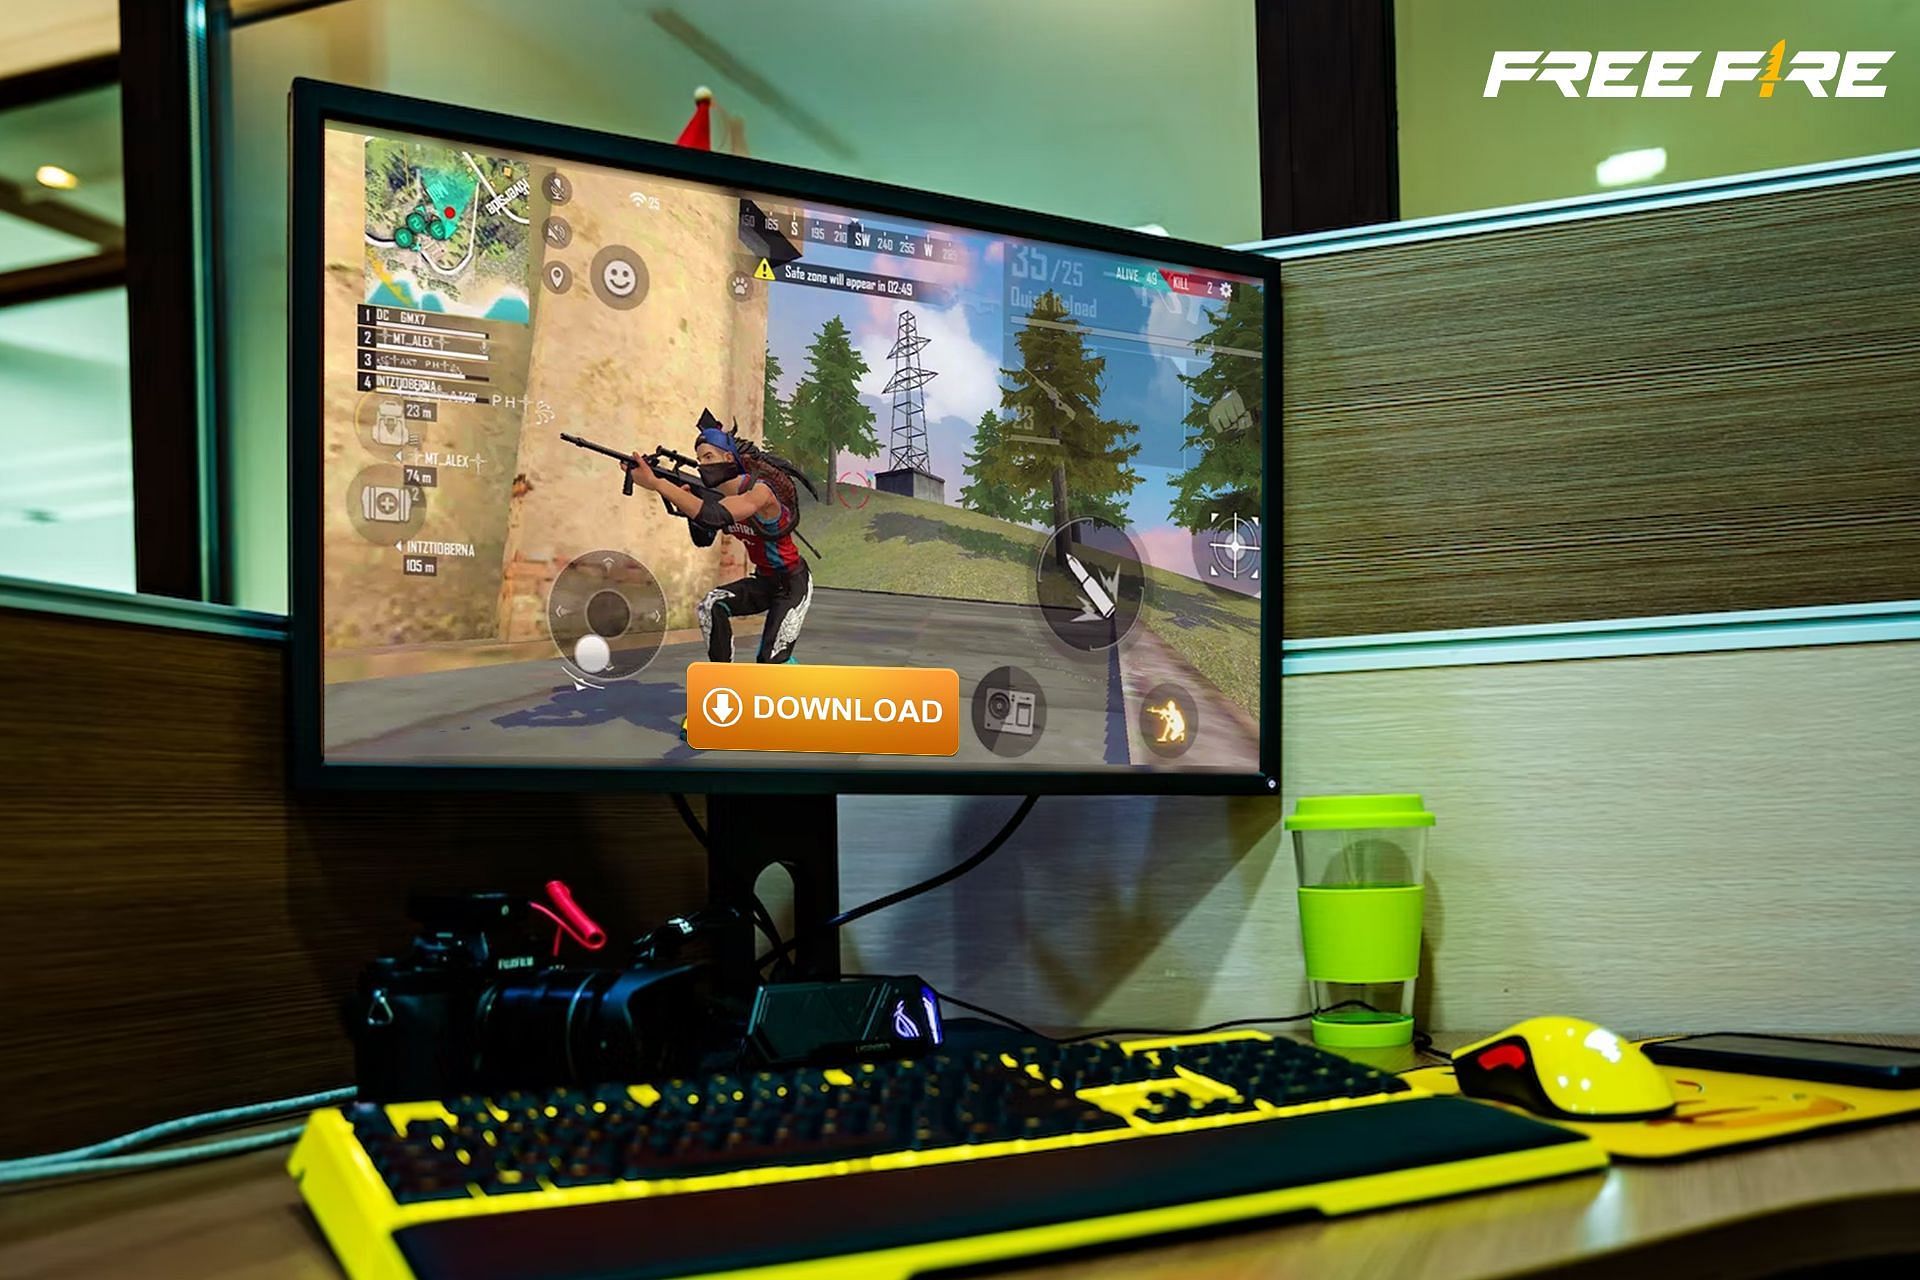 How to download Garena Free Fire on PC